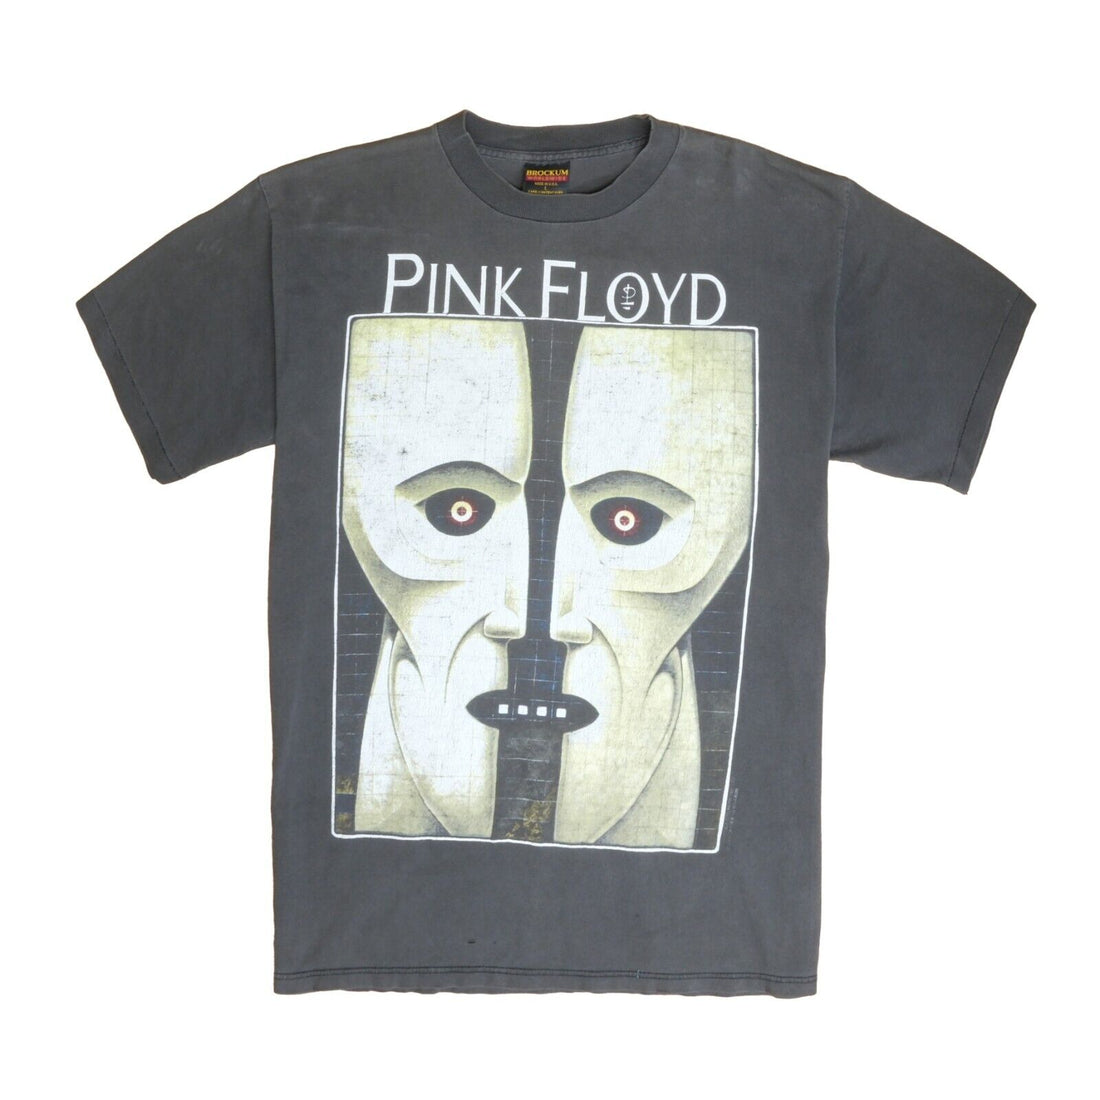 Vintage Pink Floyd The Division Bell Brockum T-Shirt Size Large Band Tee 90s